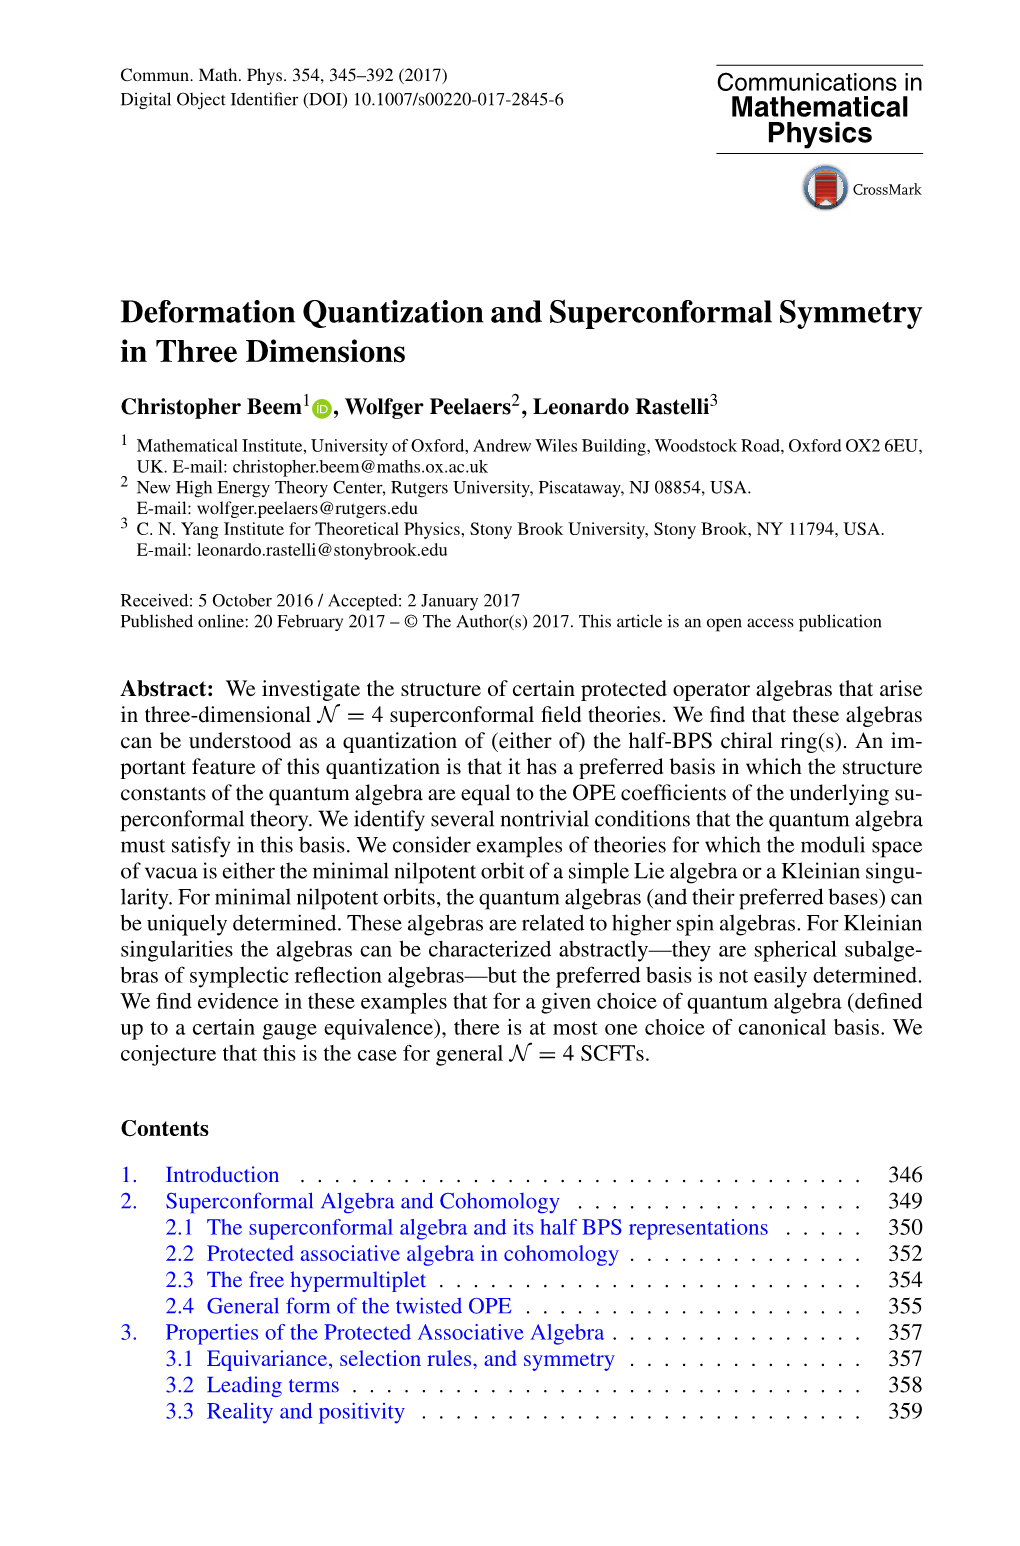 Deformation Quantization and Superconformal Symmetry in Three Dimensions